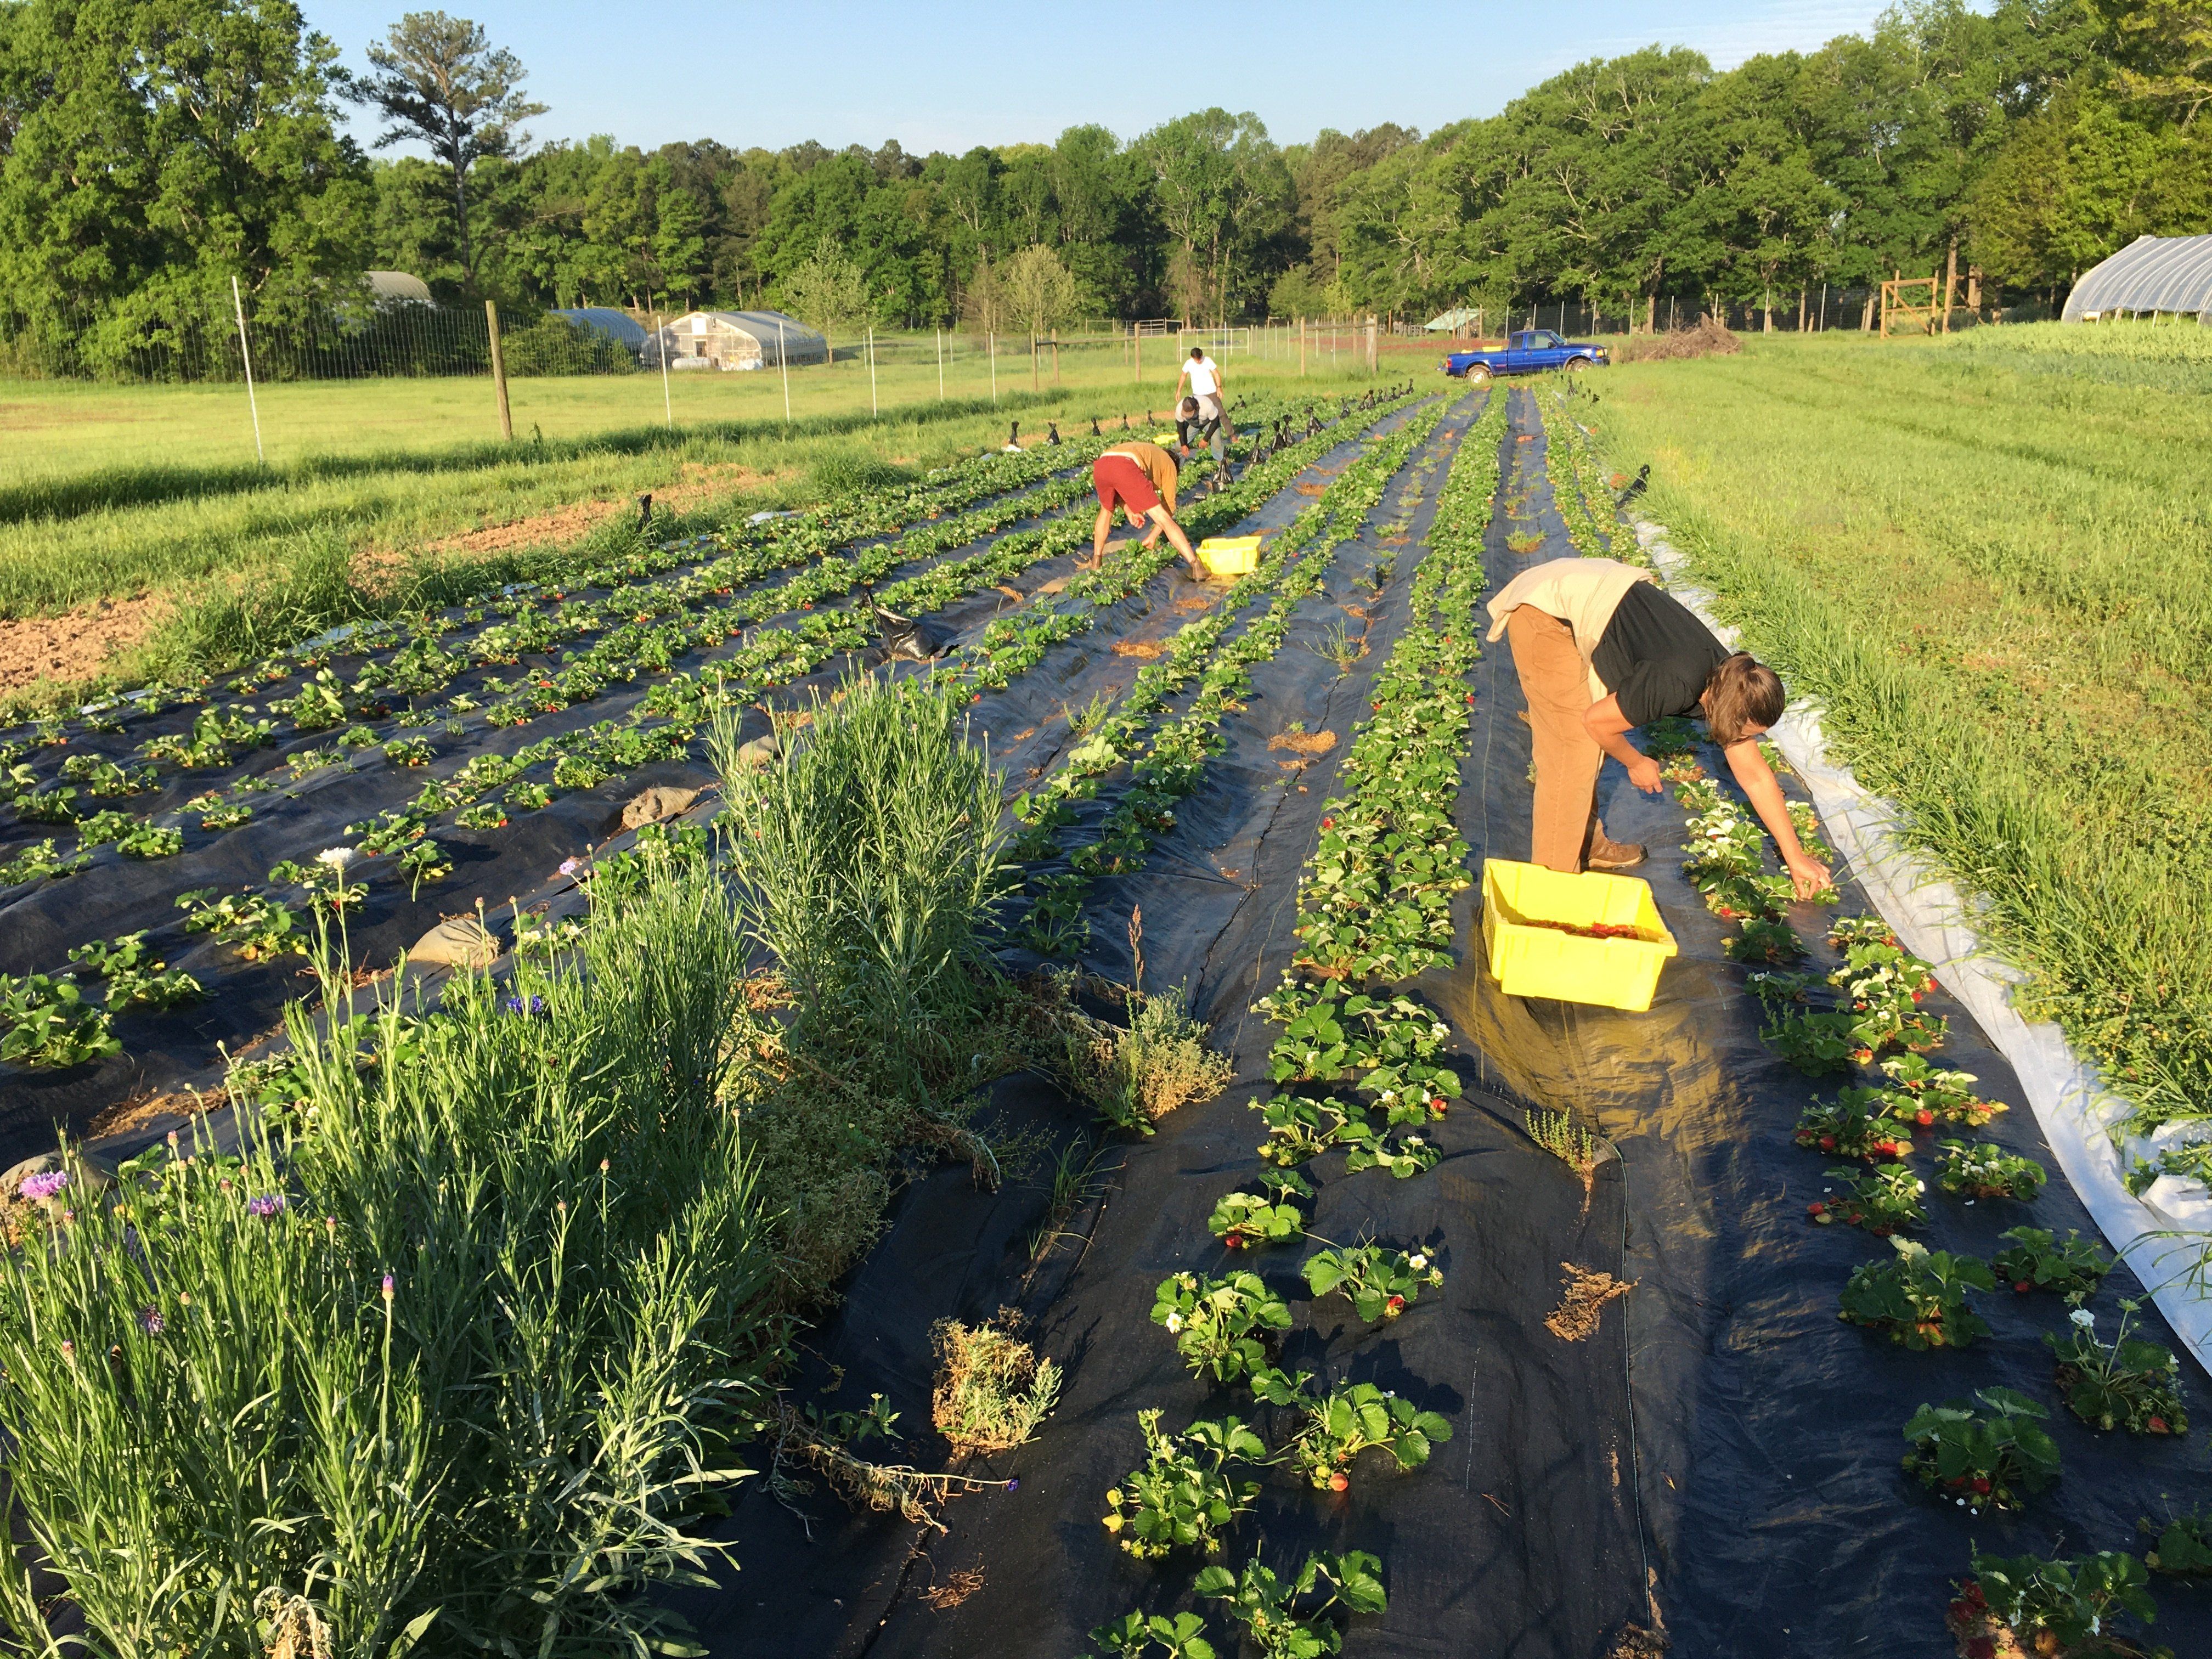 Previous Happening: Farm Happenings for May 8, 2020